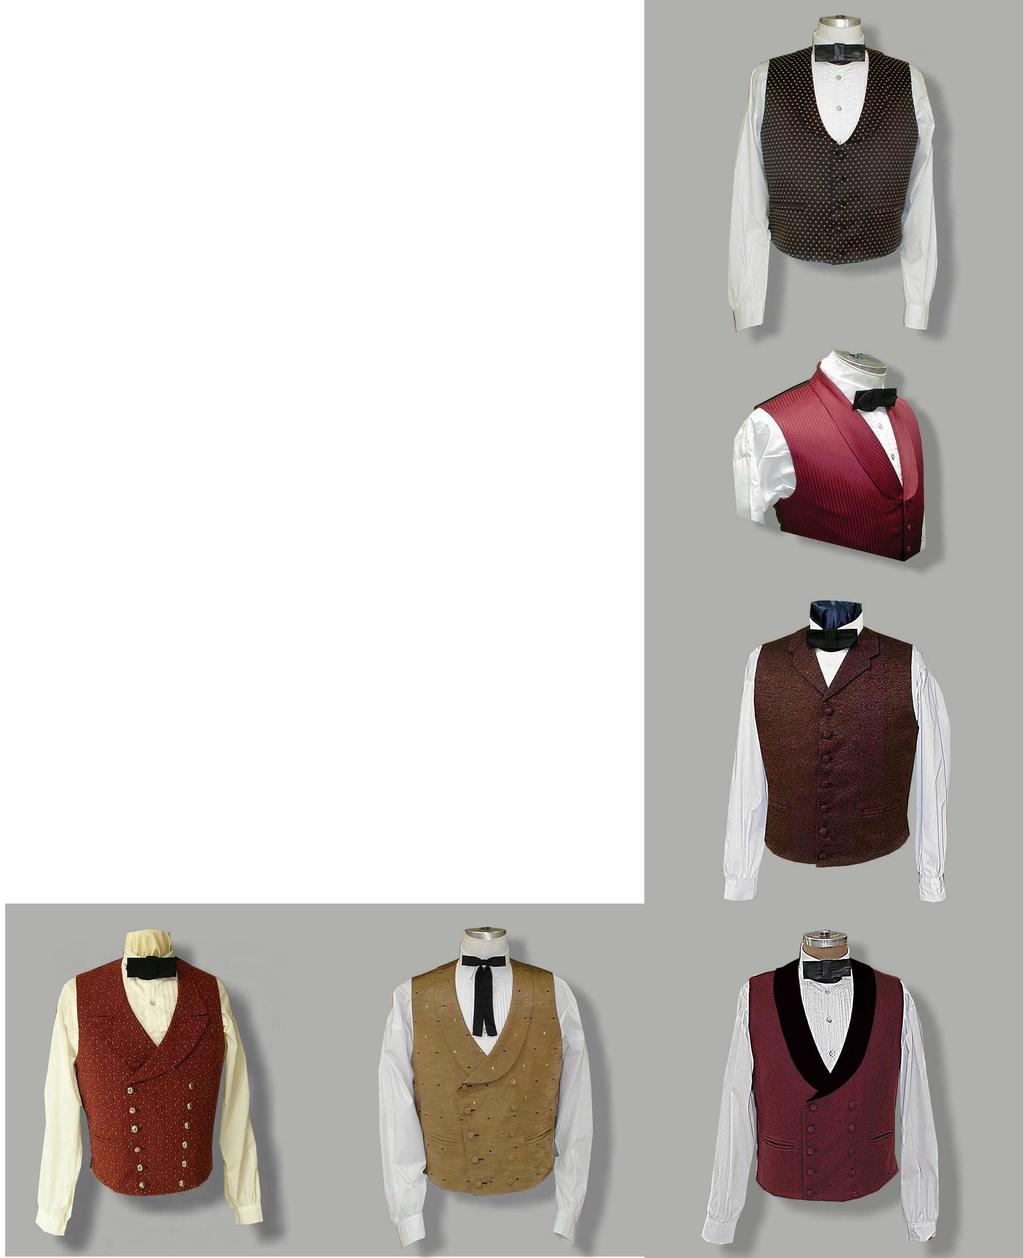 Civilian Vests Victorian Era 1850 1880 Page 19 CIVILIAN VESTS were commonly worn during the Victorian era even during the hot summer months.